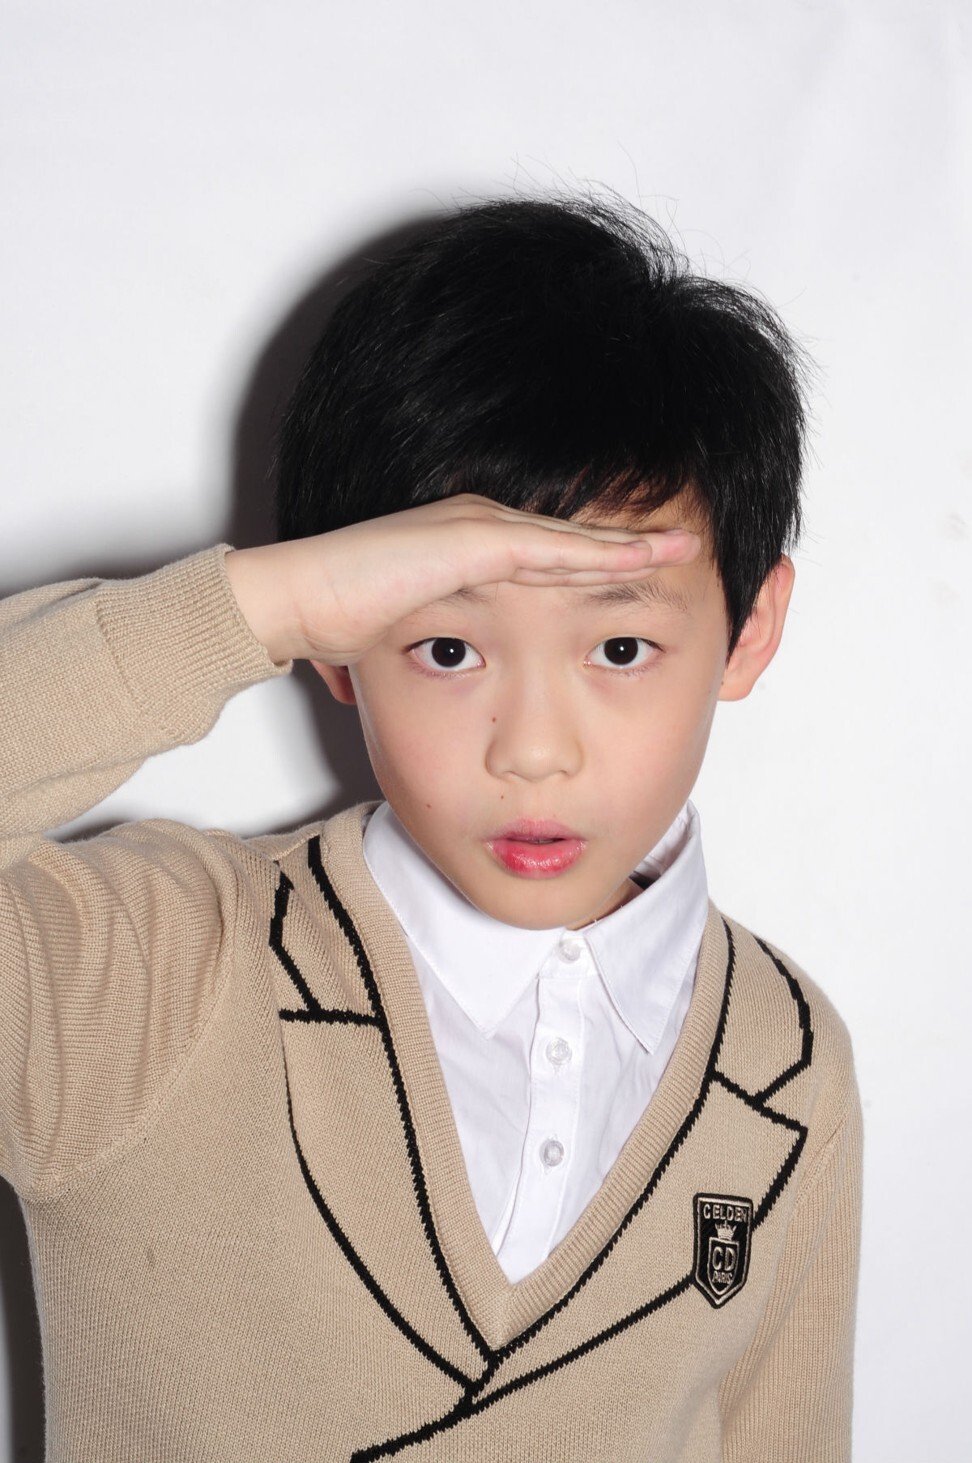 Chenle of NCT: the Chinese child star who moved to South Korea to 